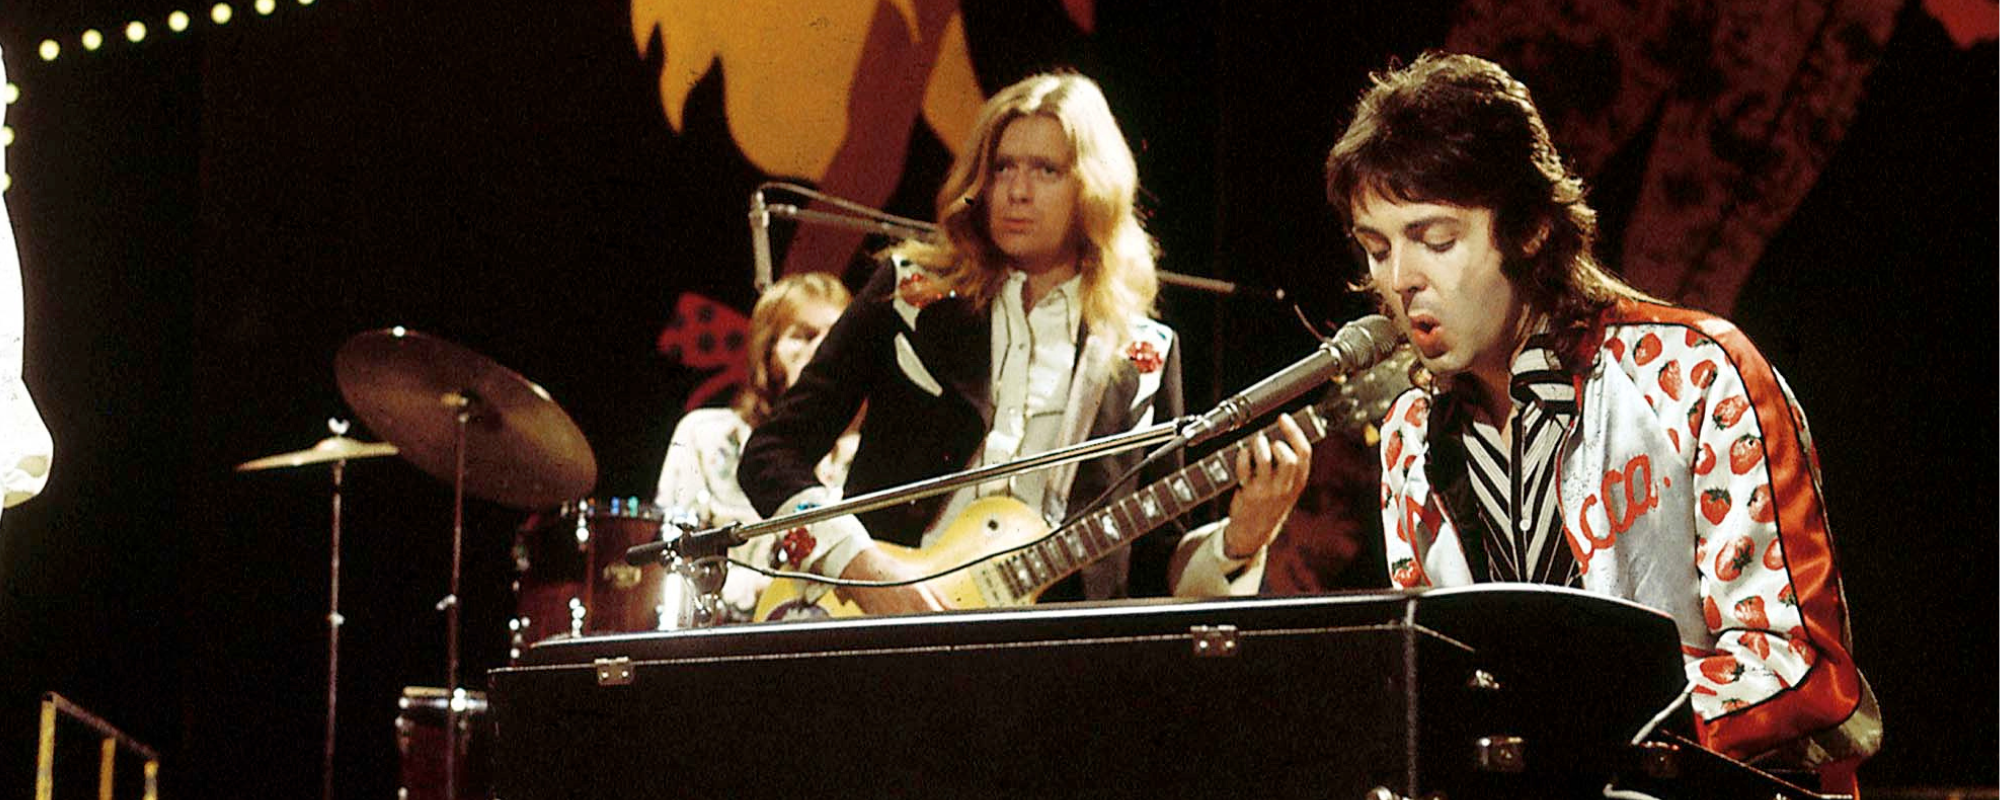 How to Find Chords That Fit Together Like The Beatles’ “Let It Be”